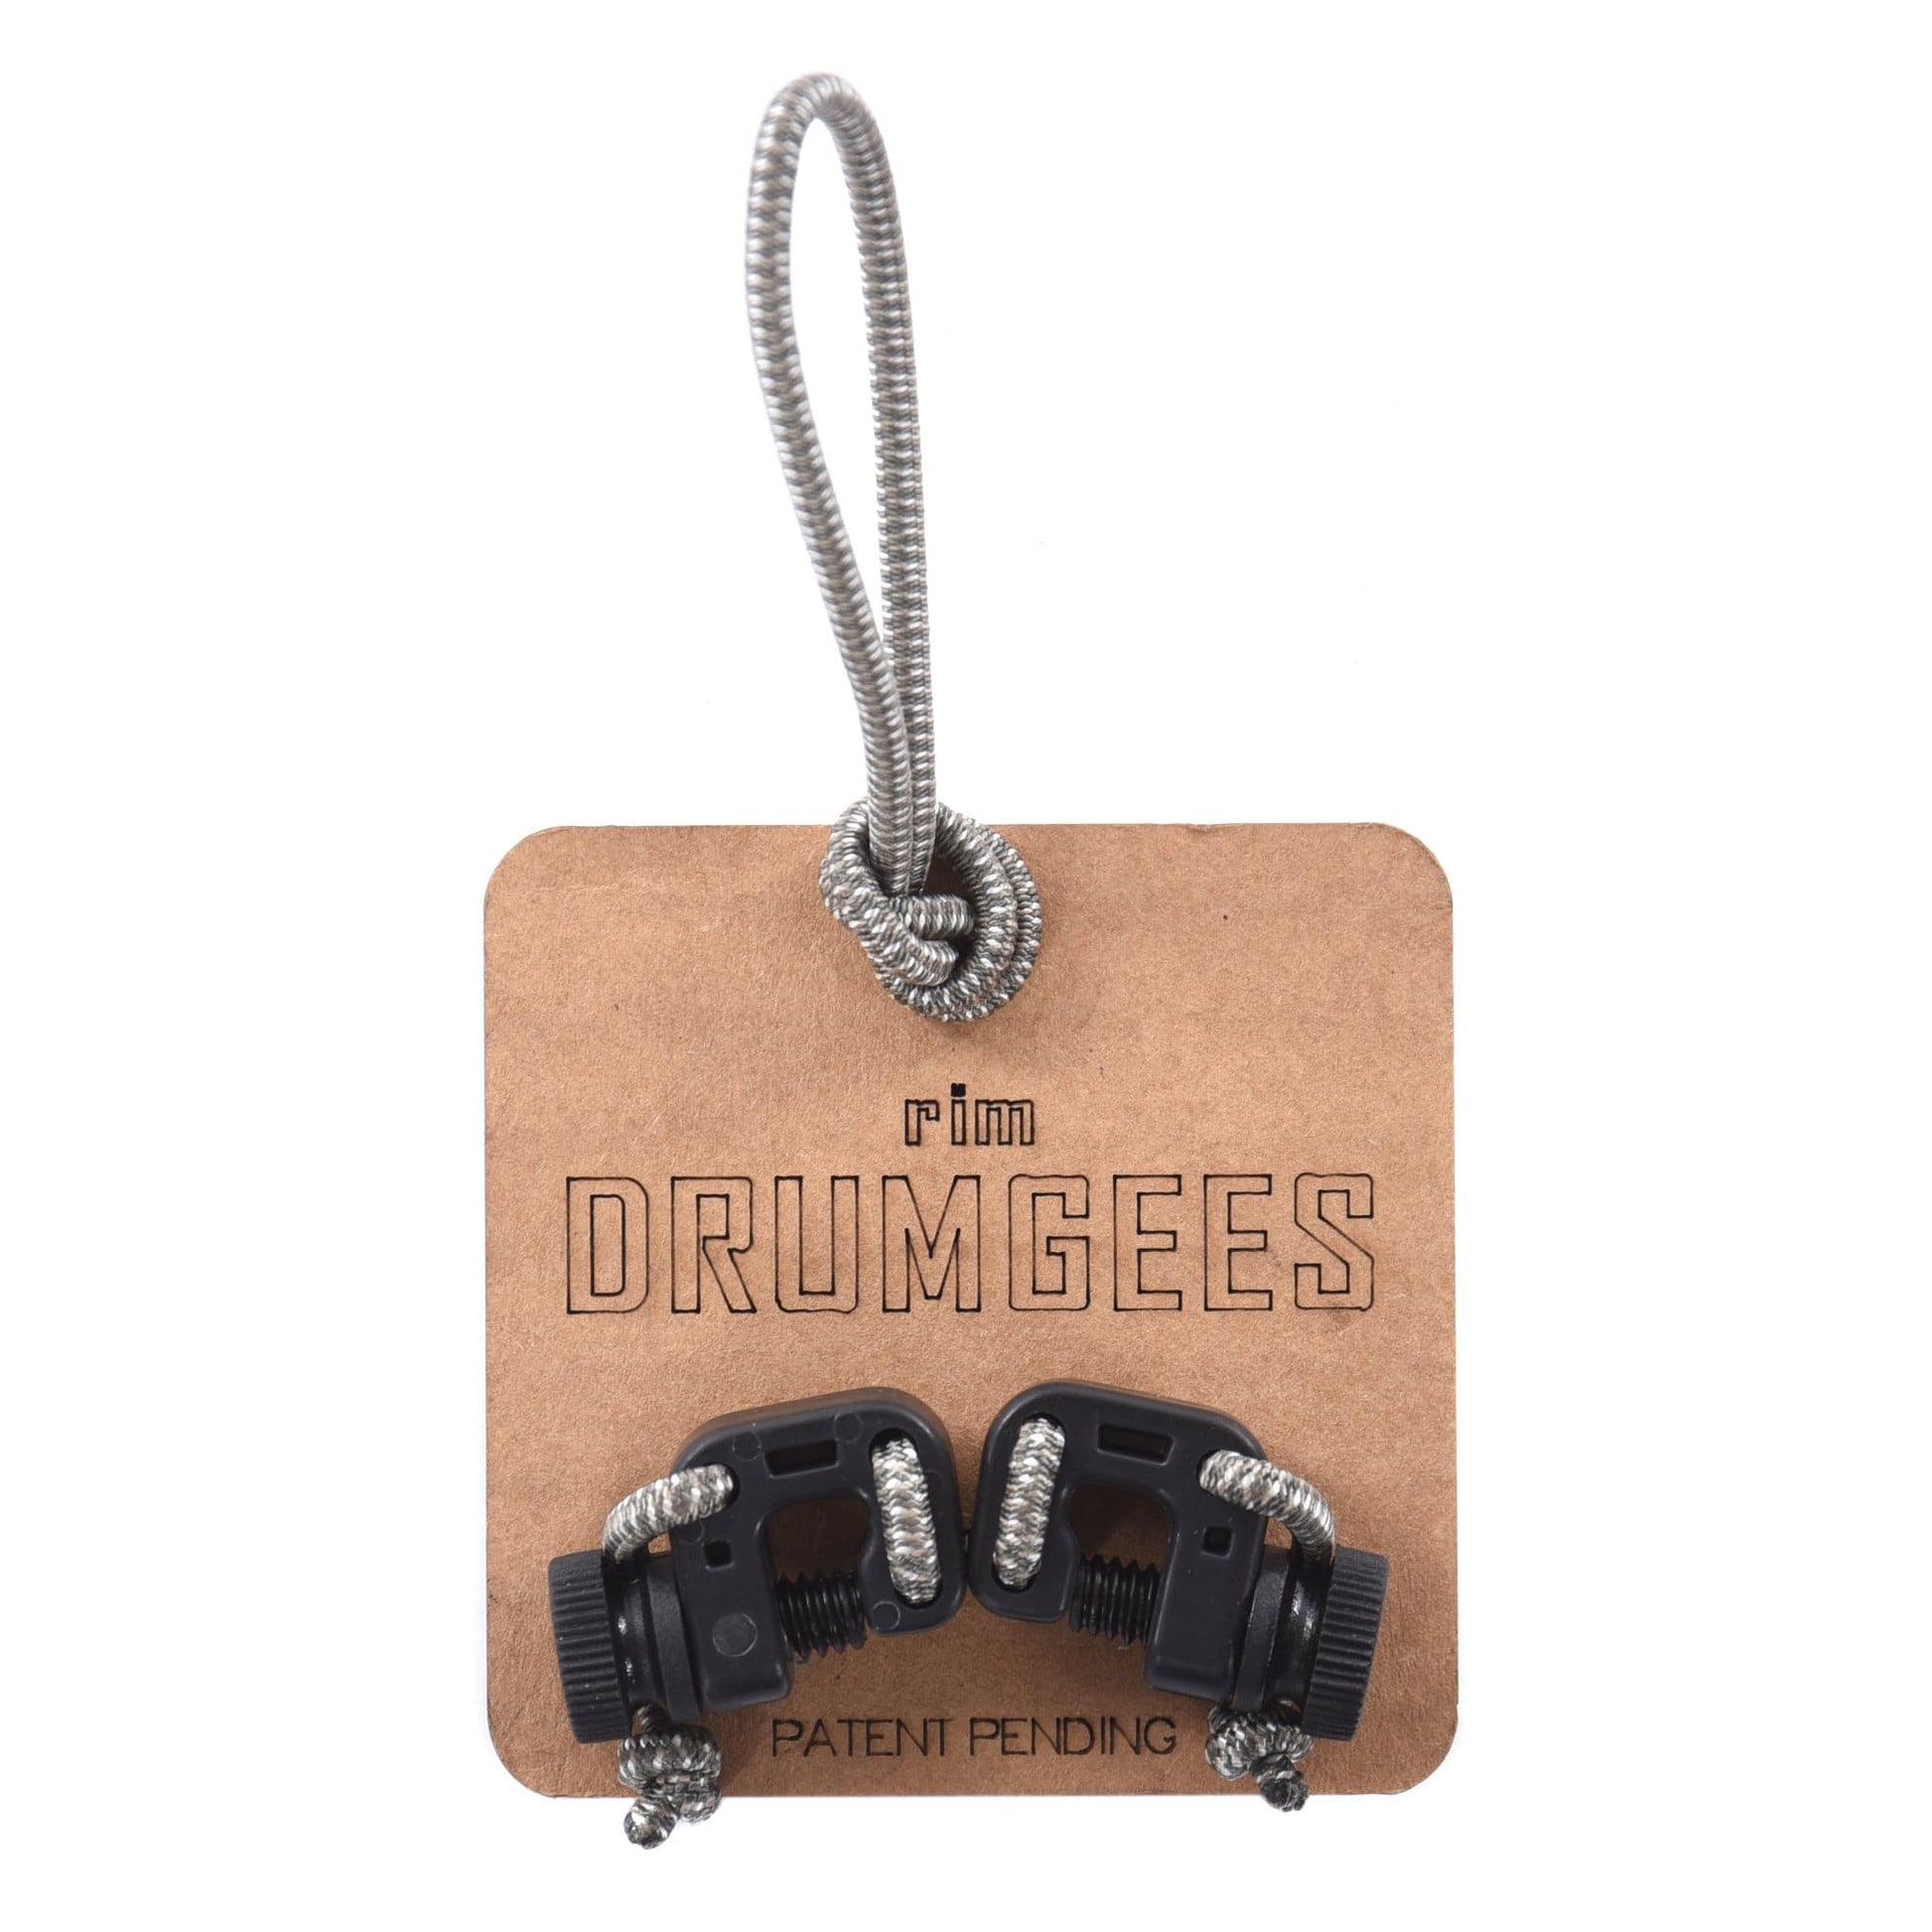 Drumgees Rim Drumgee Grey Drums and Percussion / Parts and Accessories / Drum Parts